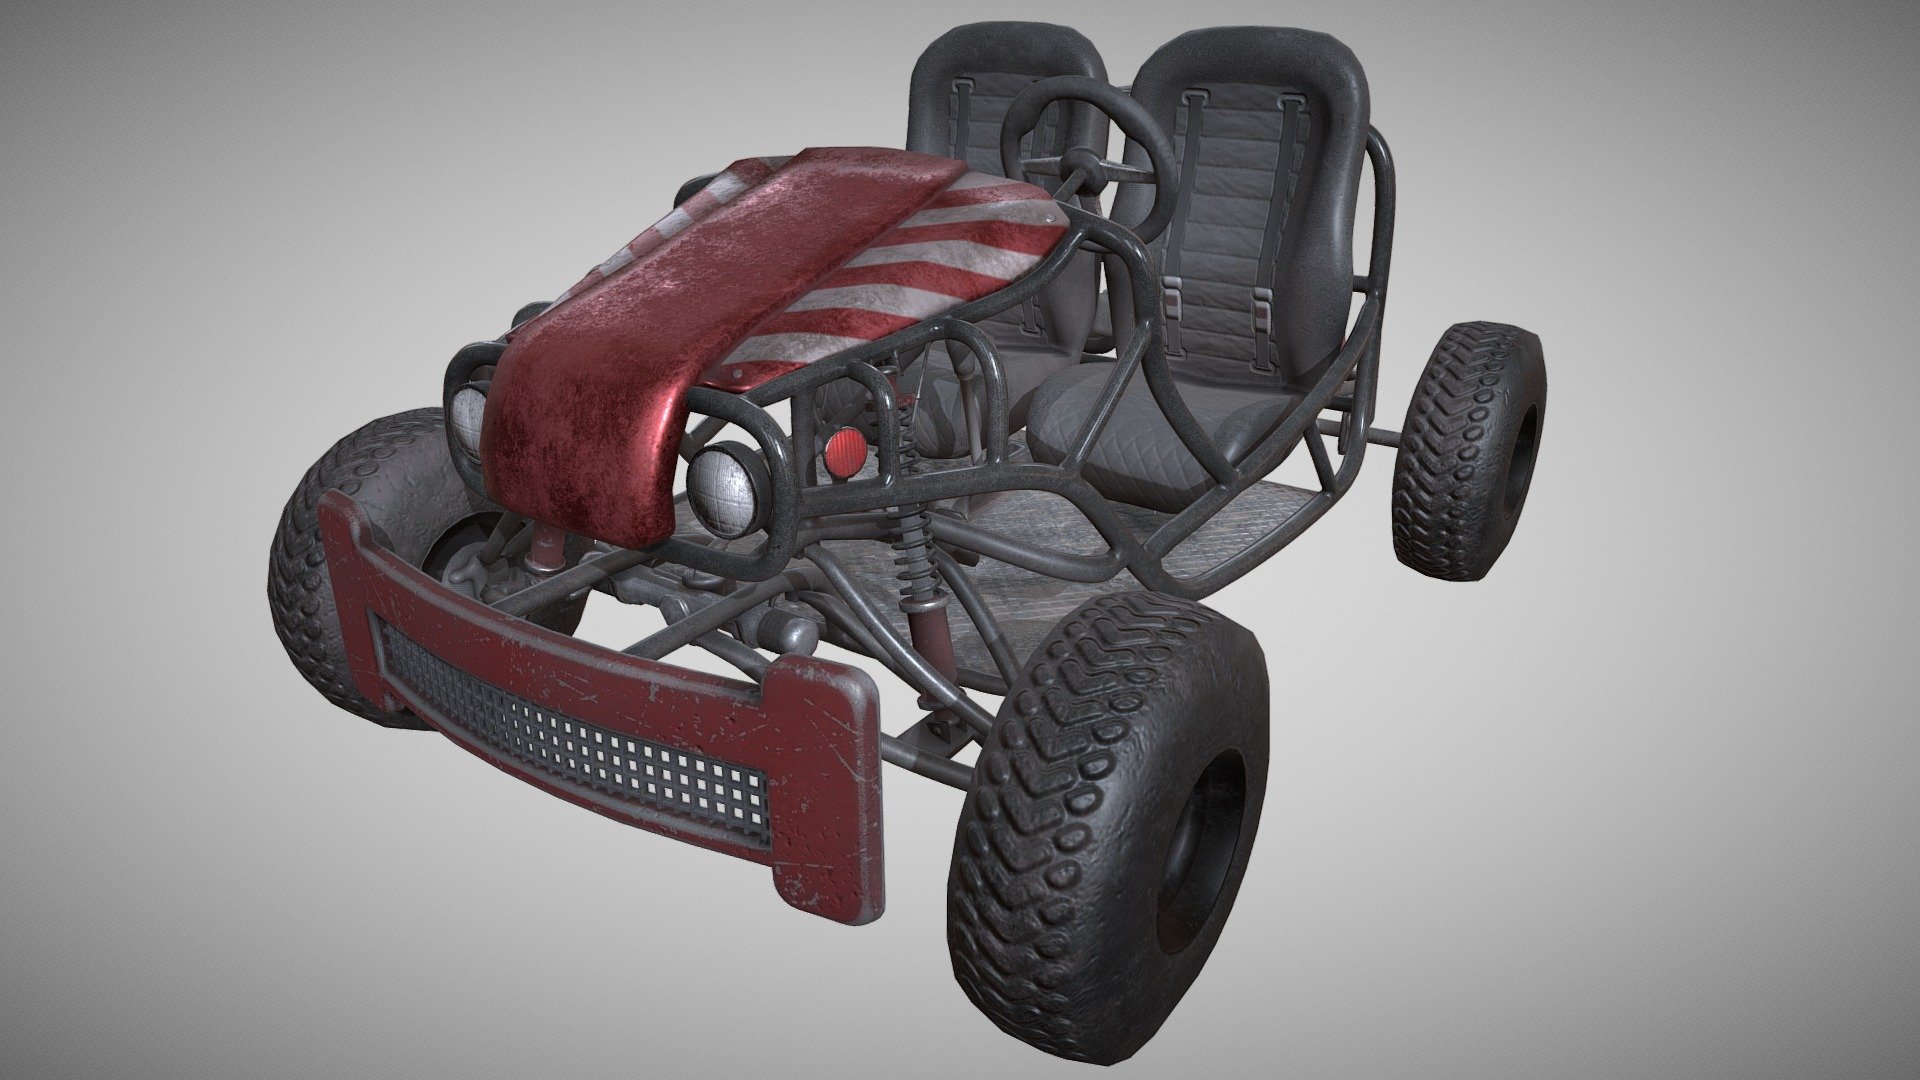 This is a Go-Kart I made using Blender and Substance. It's my own version of a childrens' go-kart. It has 2K PBR Maps for 4 different parts of the mesh. Maps are: Roughness, Height, Metallic, Normal, Color, and 2 Emissive maps for the headlights and the back-light.

The vehicle is NOT rigged or animated. It comes in one piece in an obj and its mtl file. For future calculation purposes, the steering wheel was rotated 25 degrees forward.

License Disclaimer: This model was inspired by Tao's JeepAuto Go Kart model. The hood, tires, bumper, and seats are my own design but the basic skeleton is very similar so I decided to go with the CC Attribution-NonCommercial license 3d model